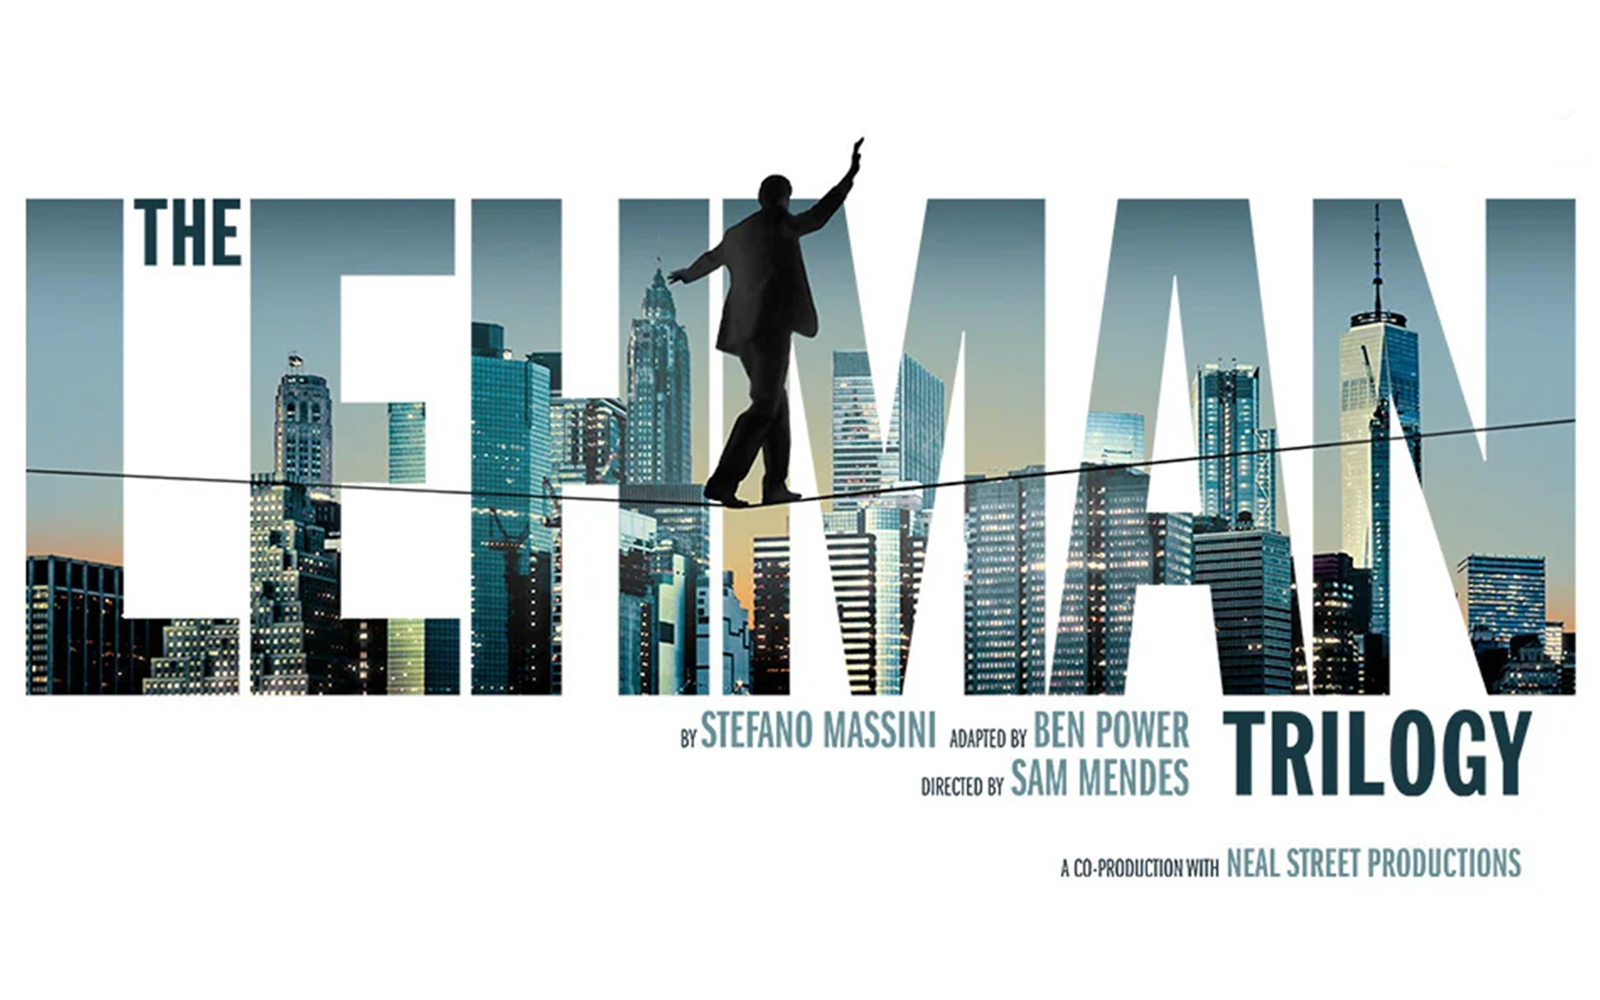 Image of The Lehman Trilogy